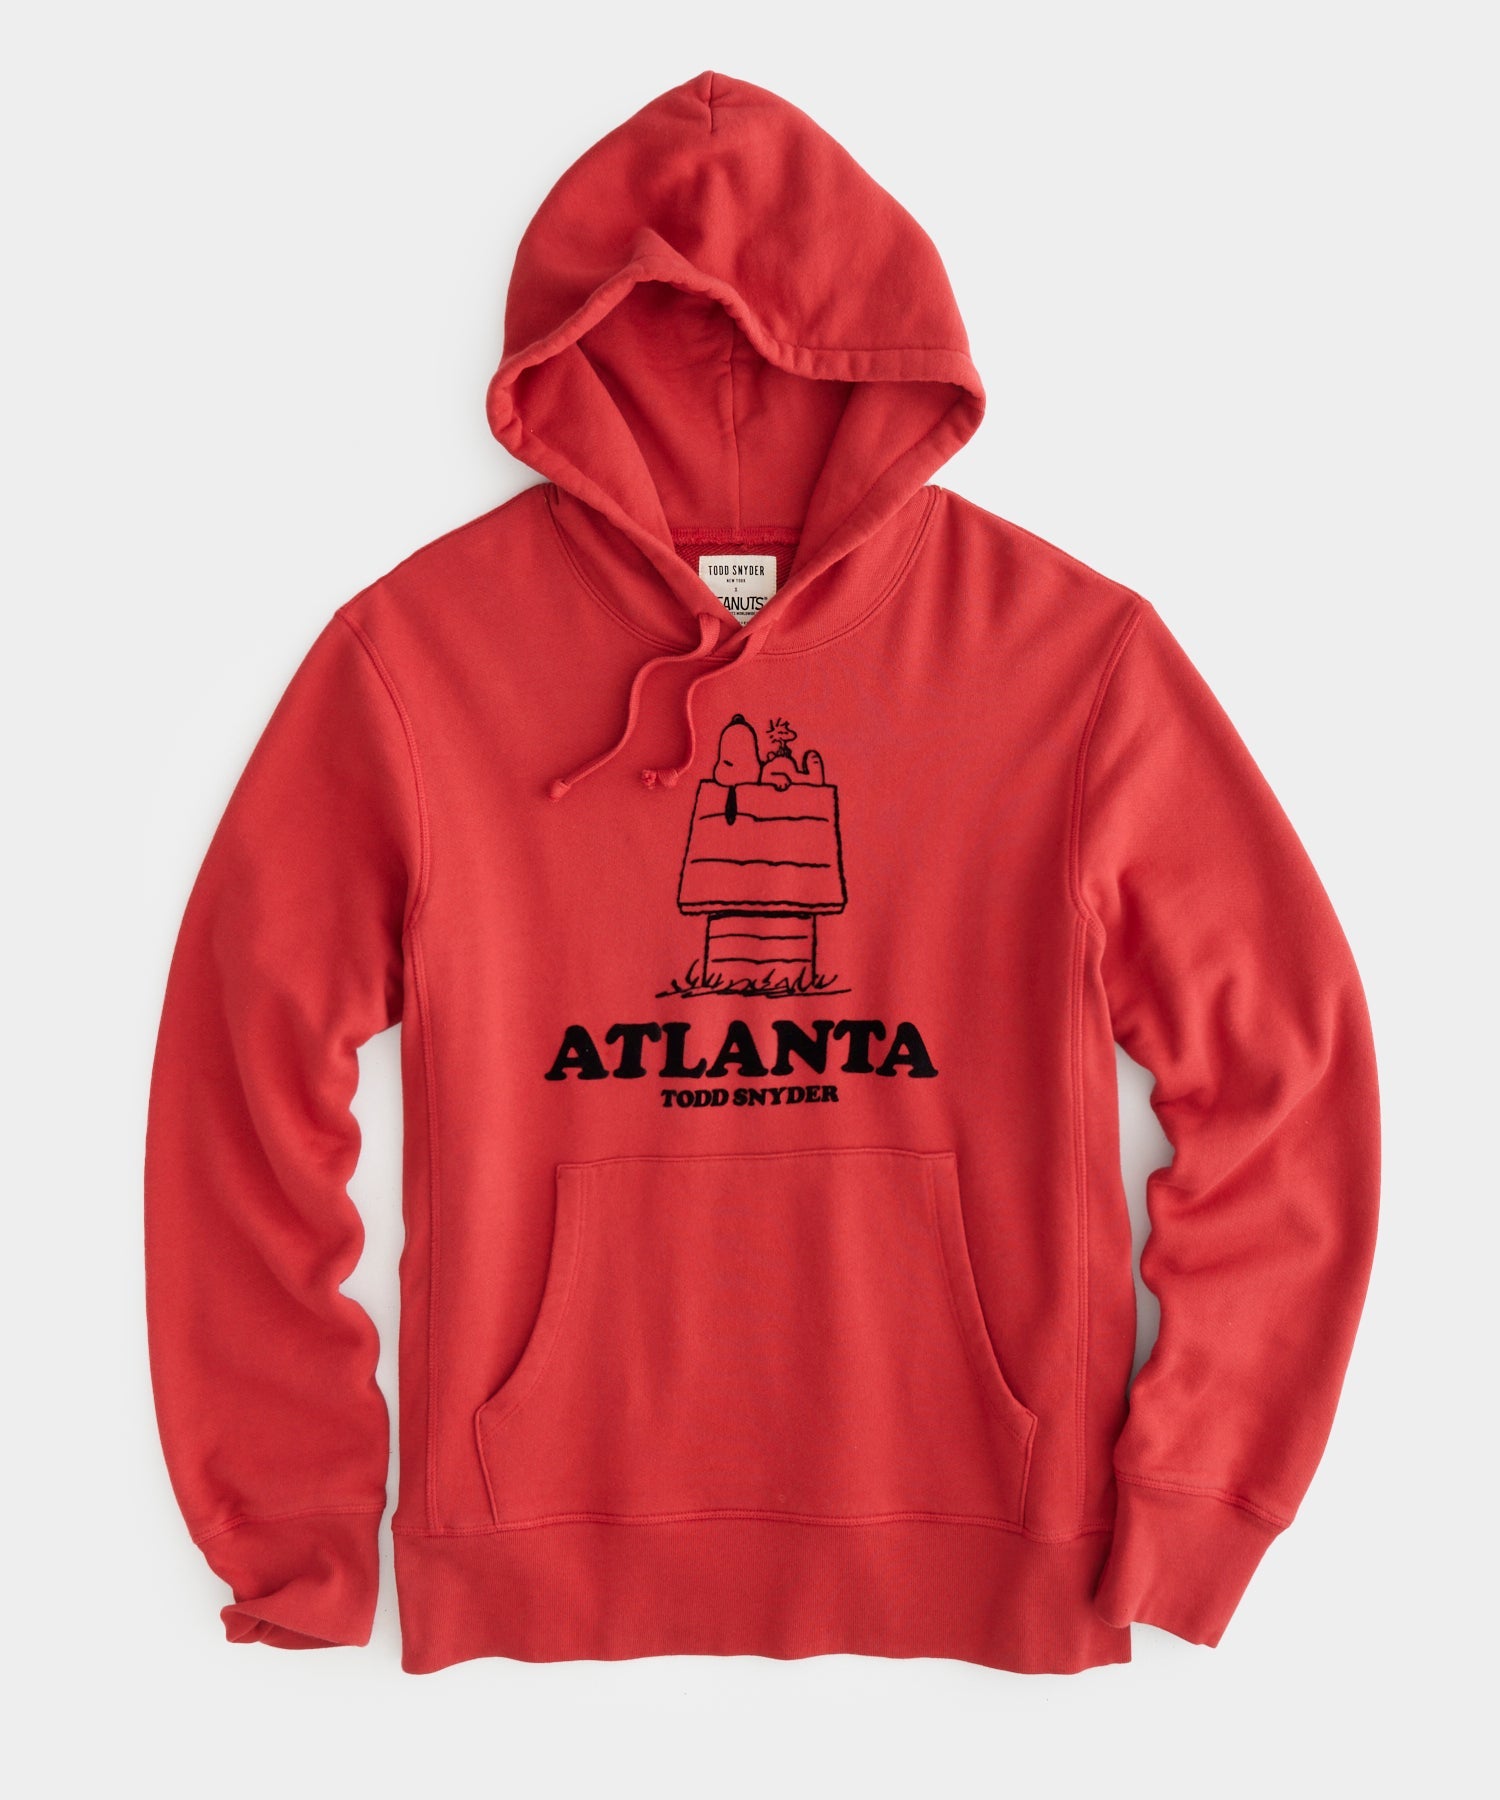 Todd Snyder x Peanuts French Terry Atlanta Hoodie